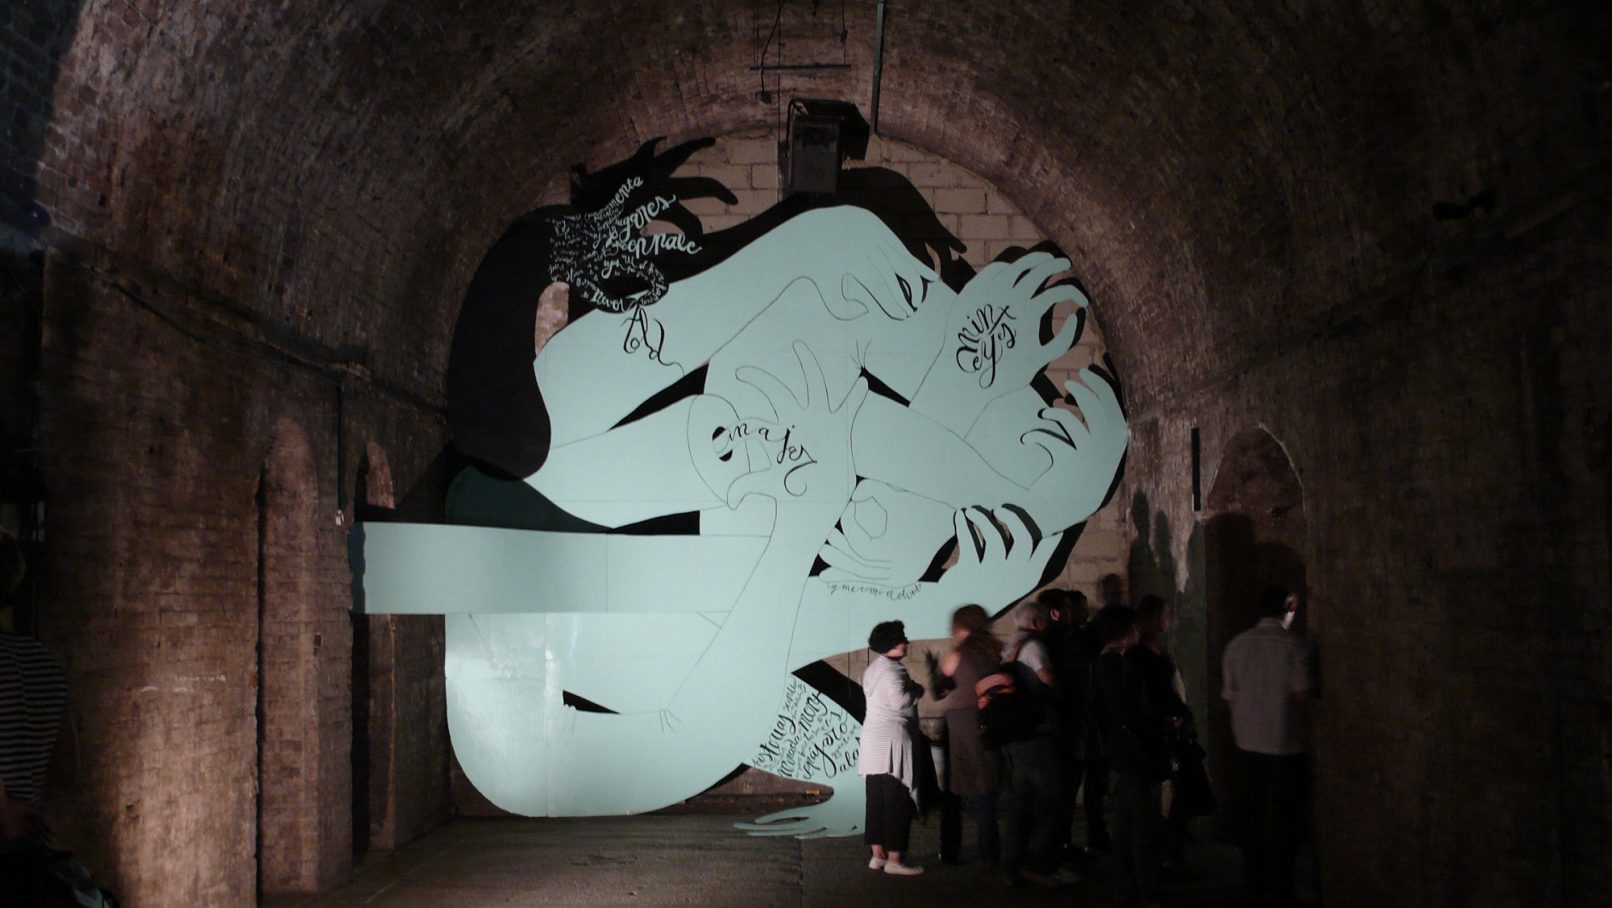 Knotted Arms with people walking by, a 11.50 x 5 m installation created in the massive Shunt Vaults